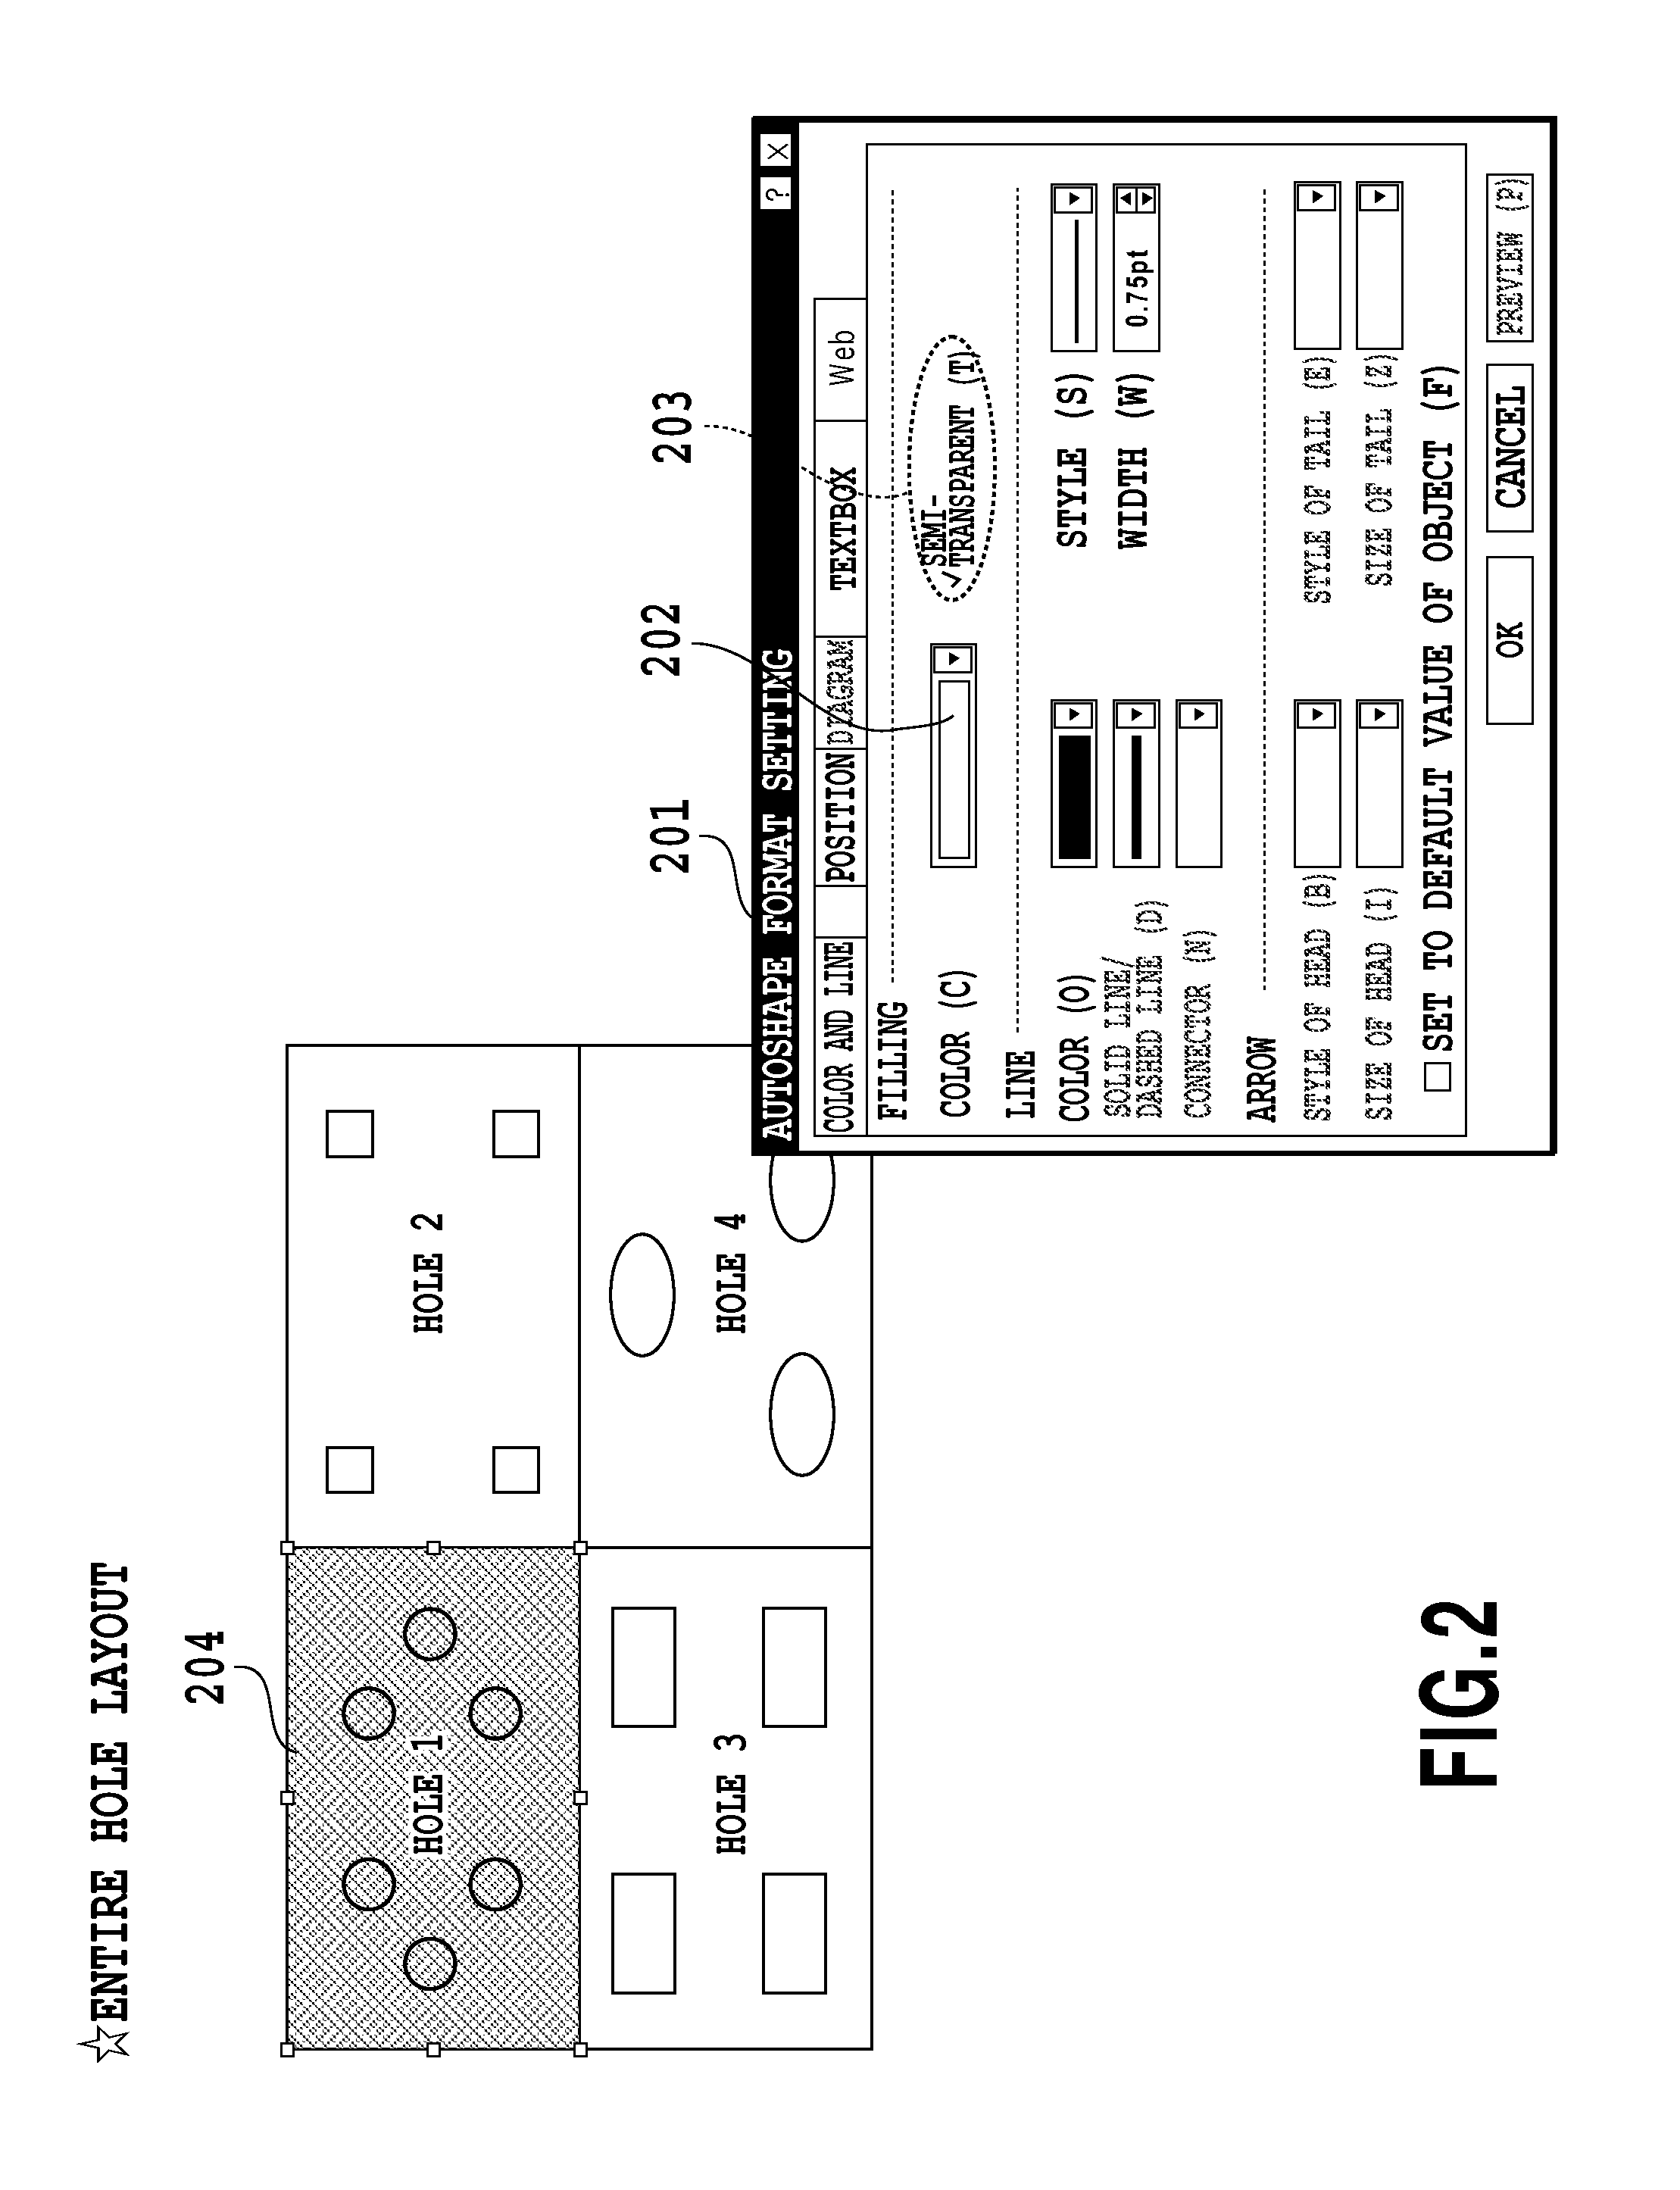 Image processor and image processing method processing an image that includes a semi-transparent object or an image with periodically varying density